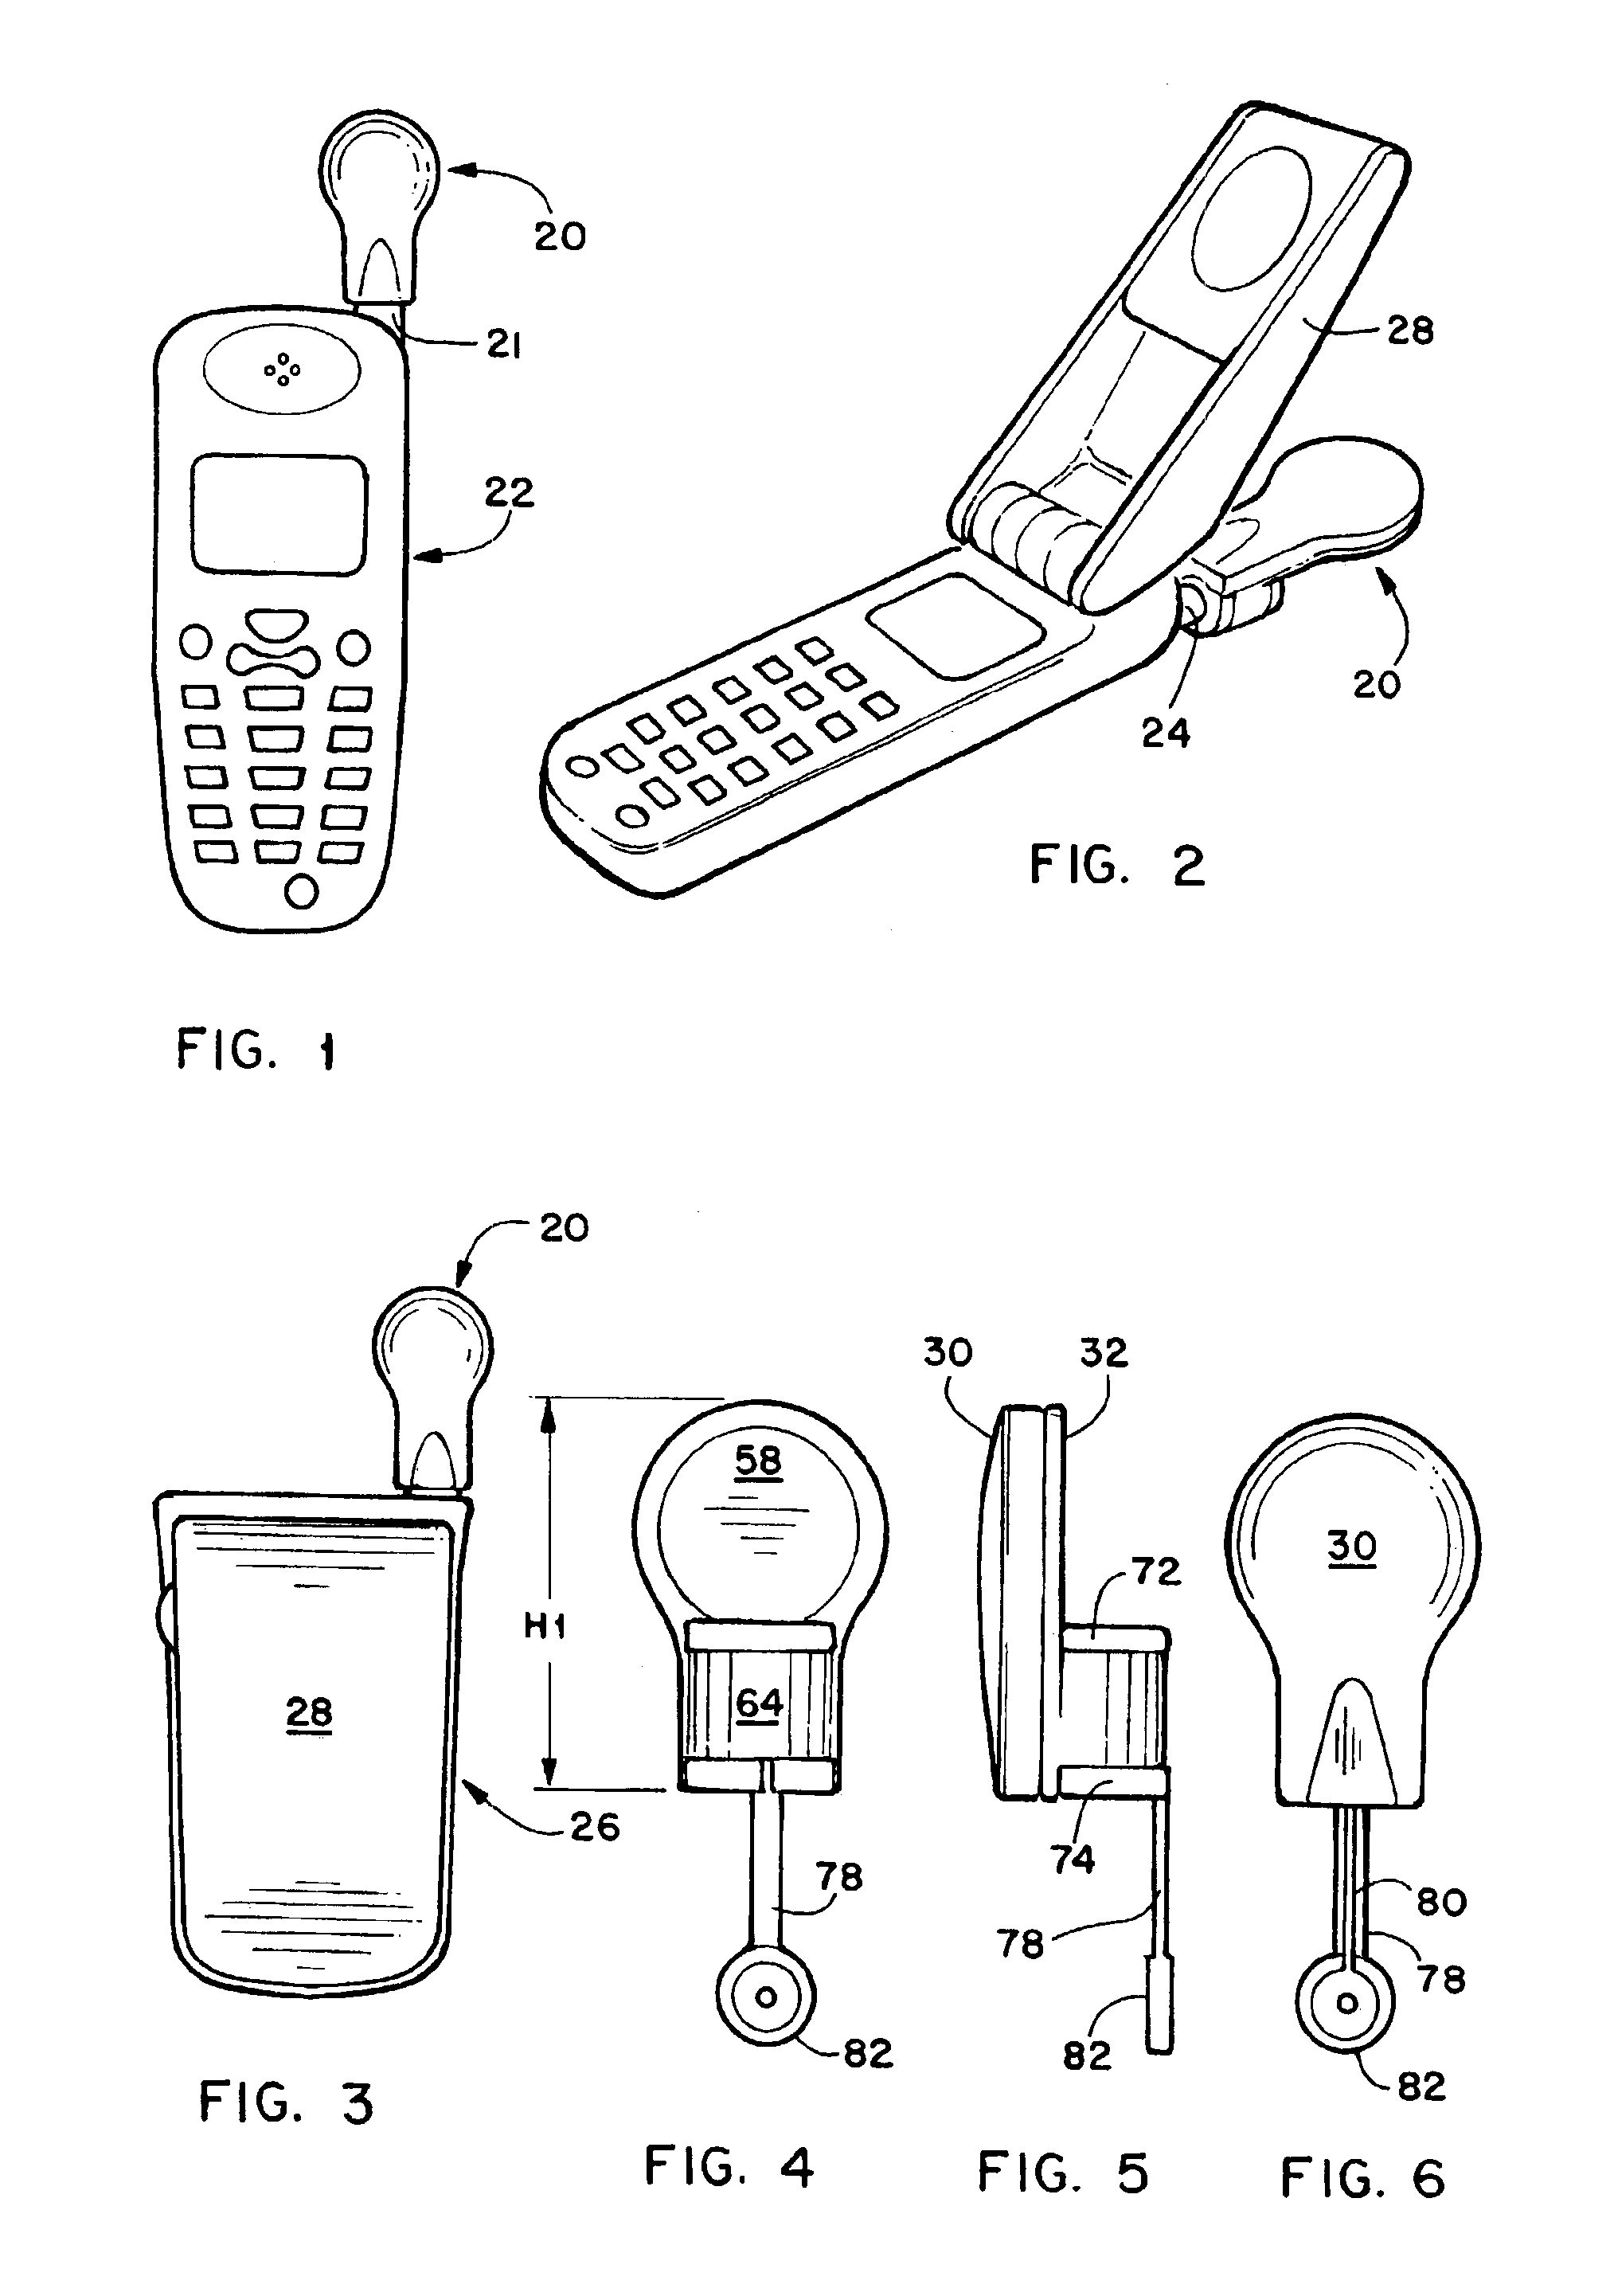 Radio frequency radiation shield unit for wireless telephones